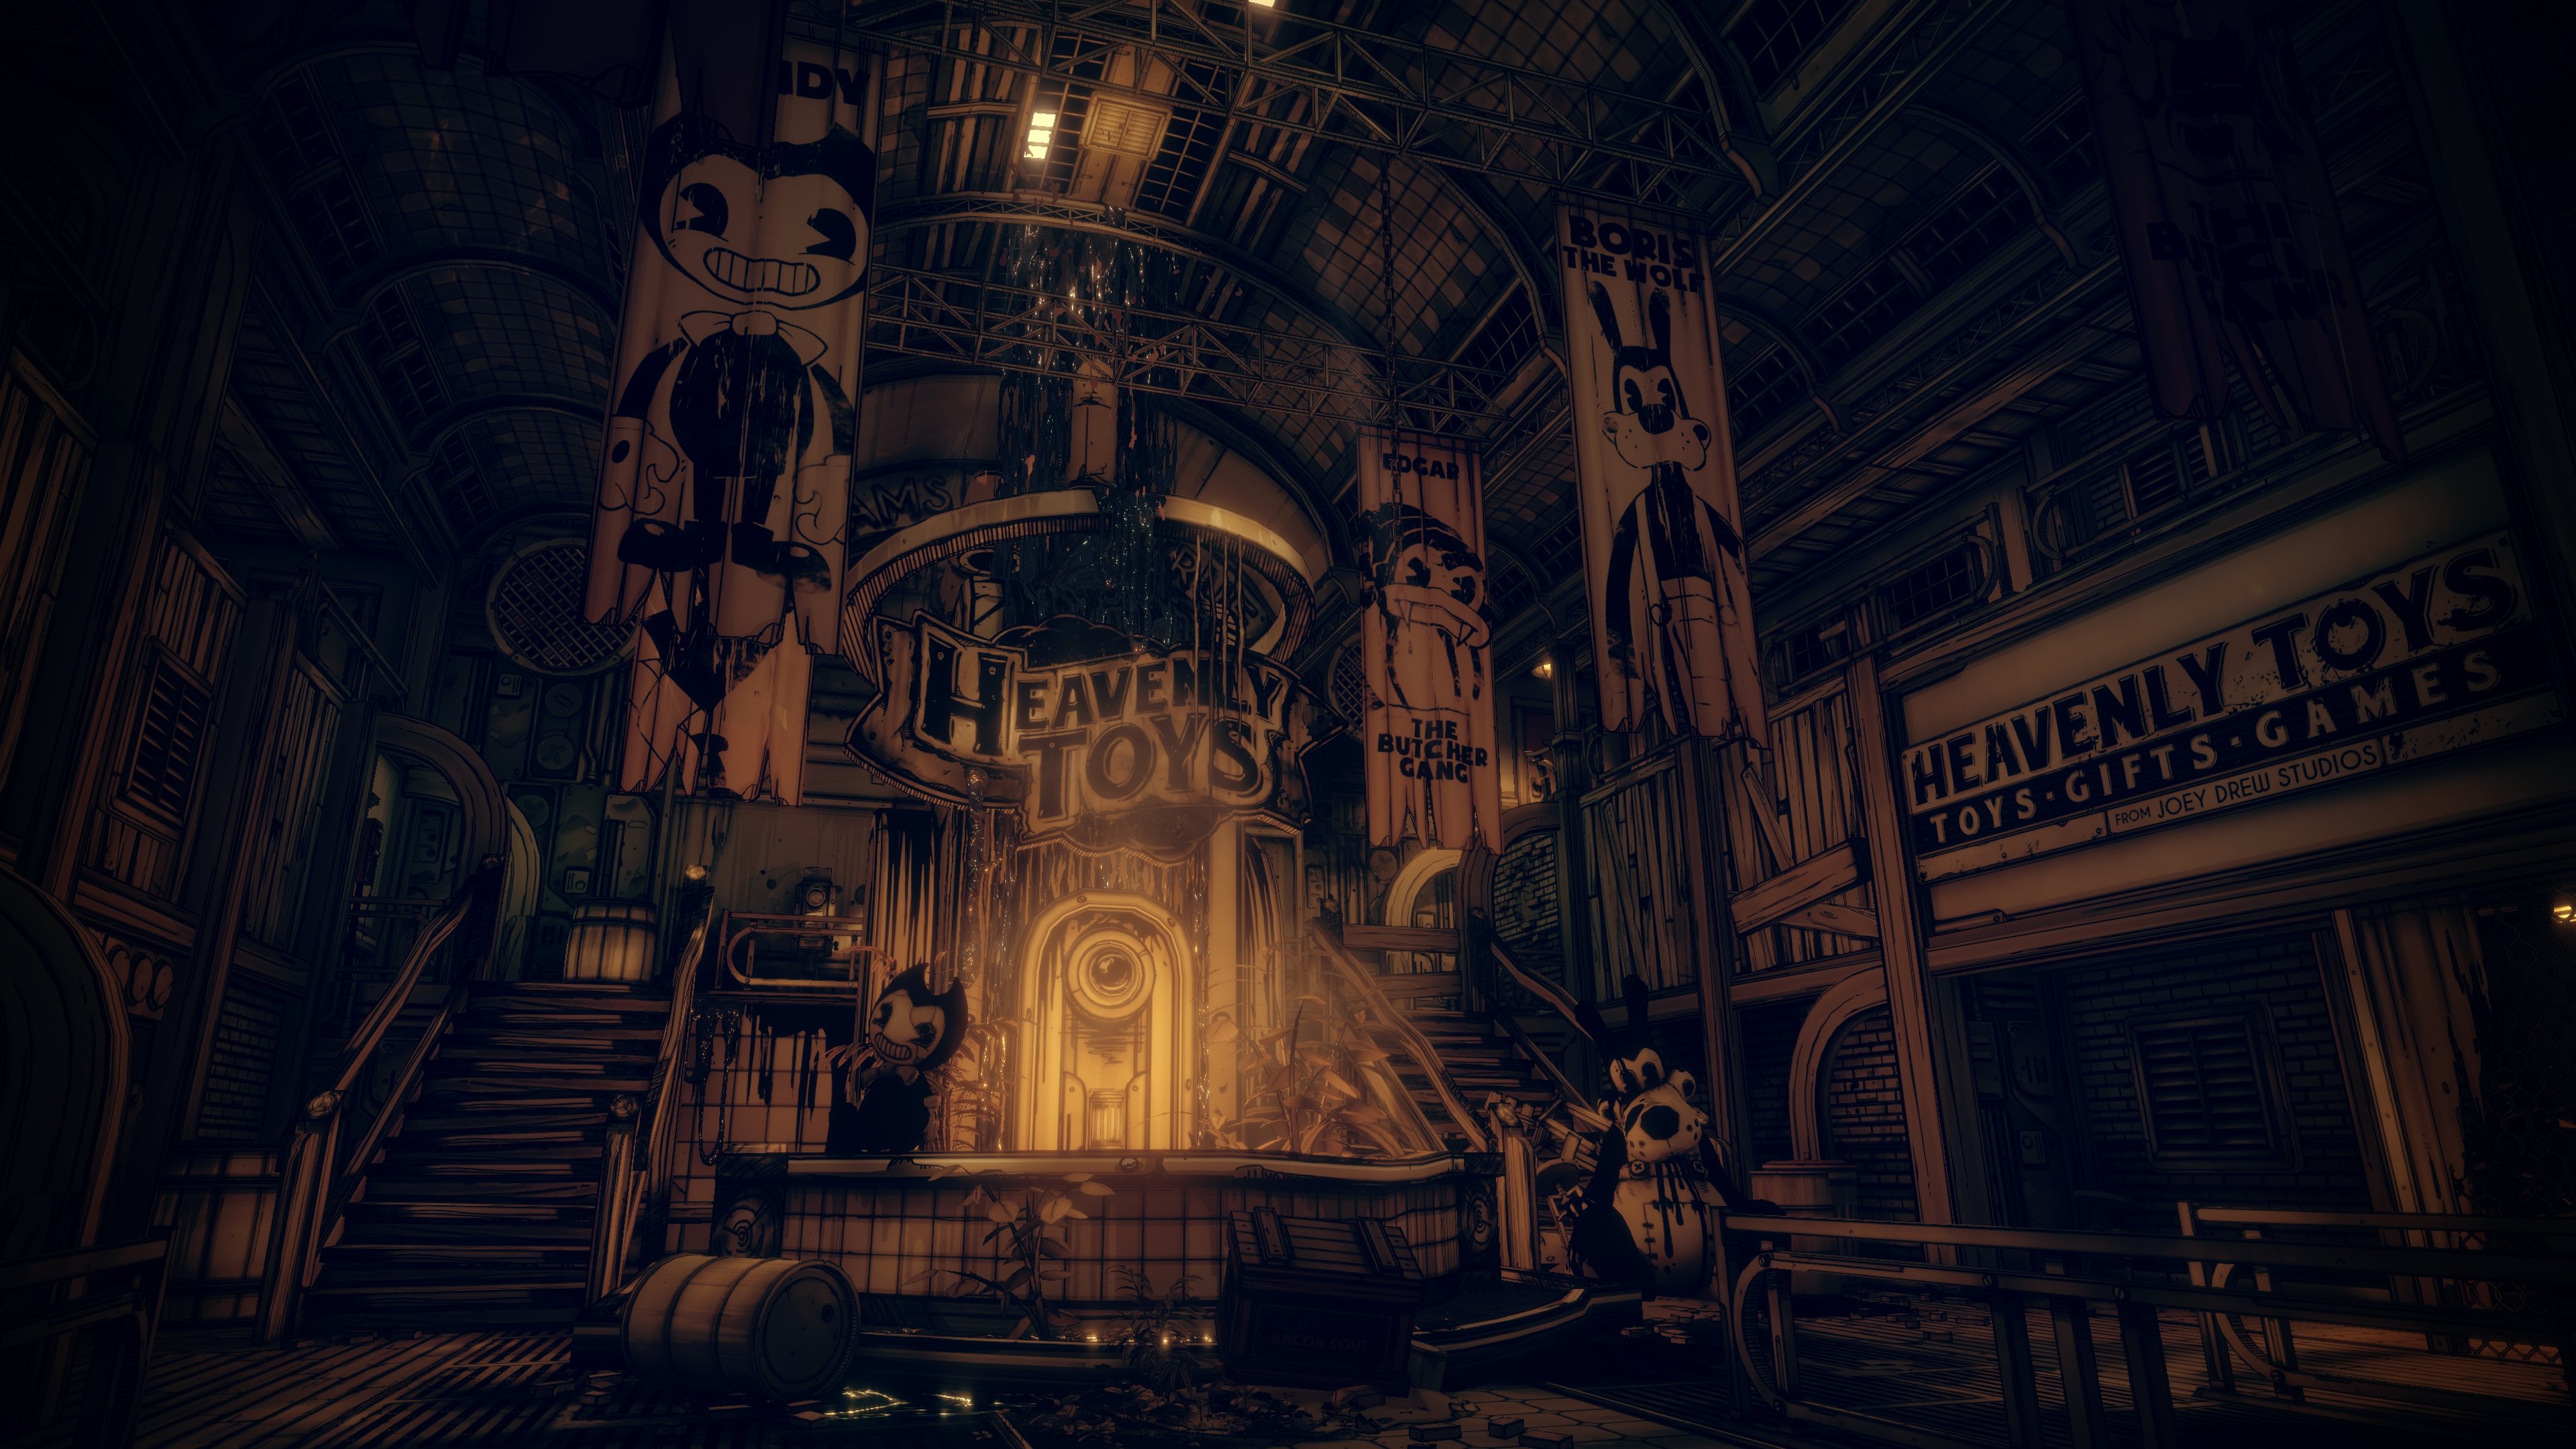 Download Bendy and the Ink Machine Demo Free and Play on PC